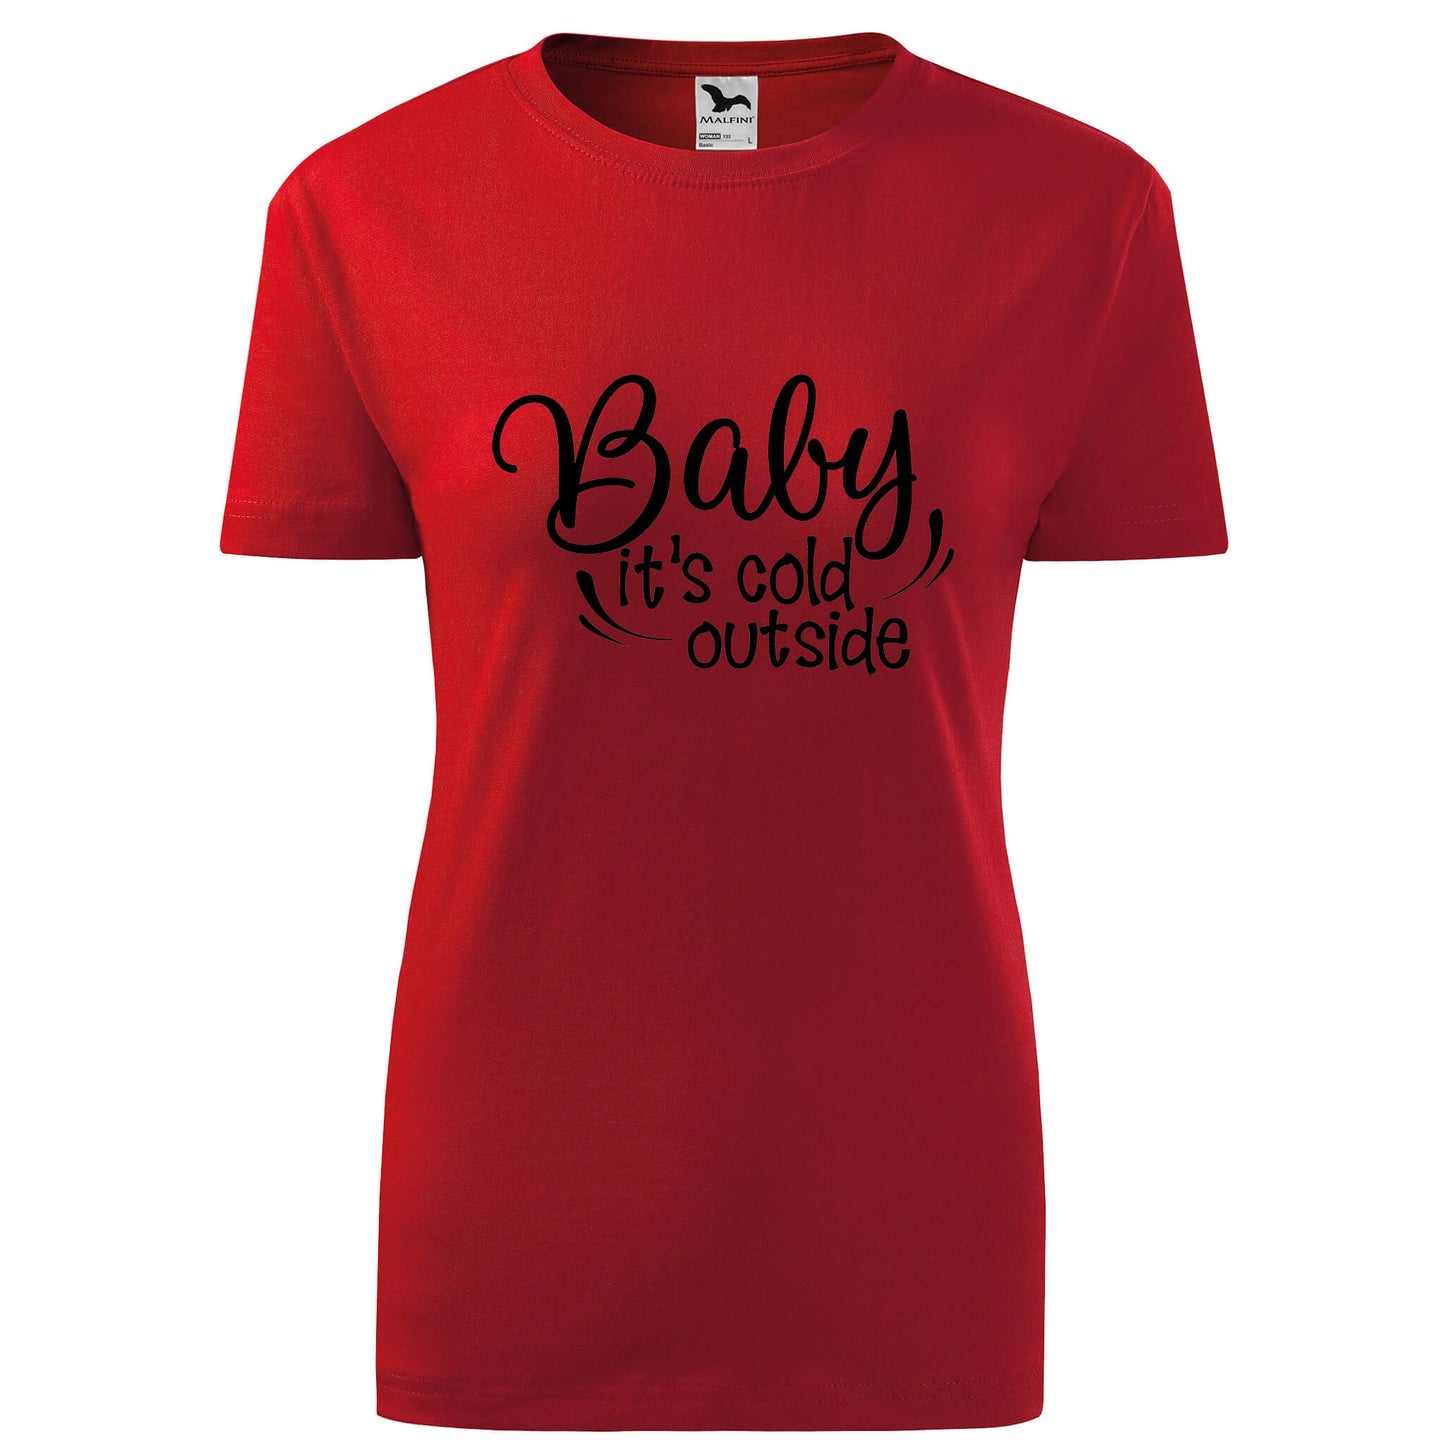 Baby its cold outside t-shirt - rvdesignprint